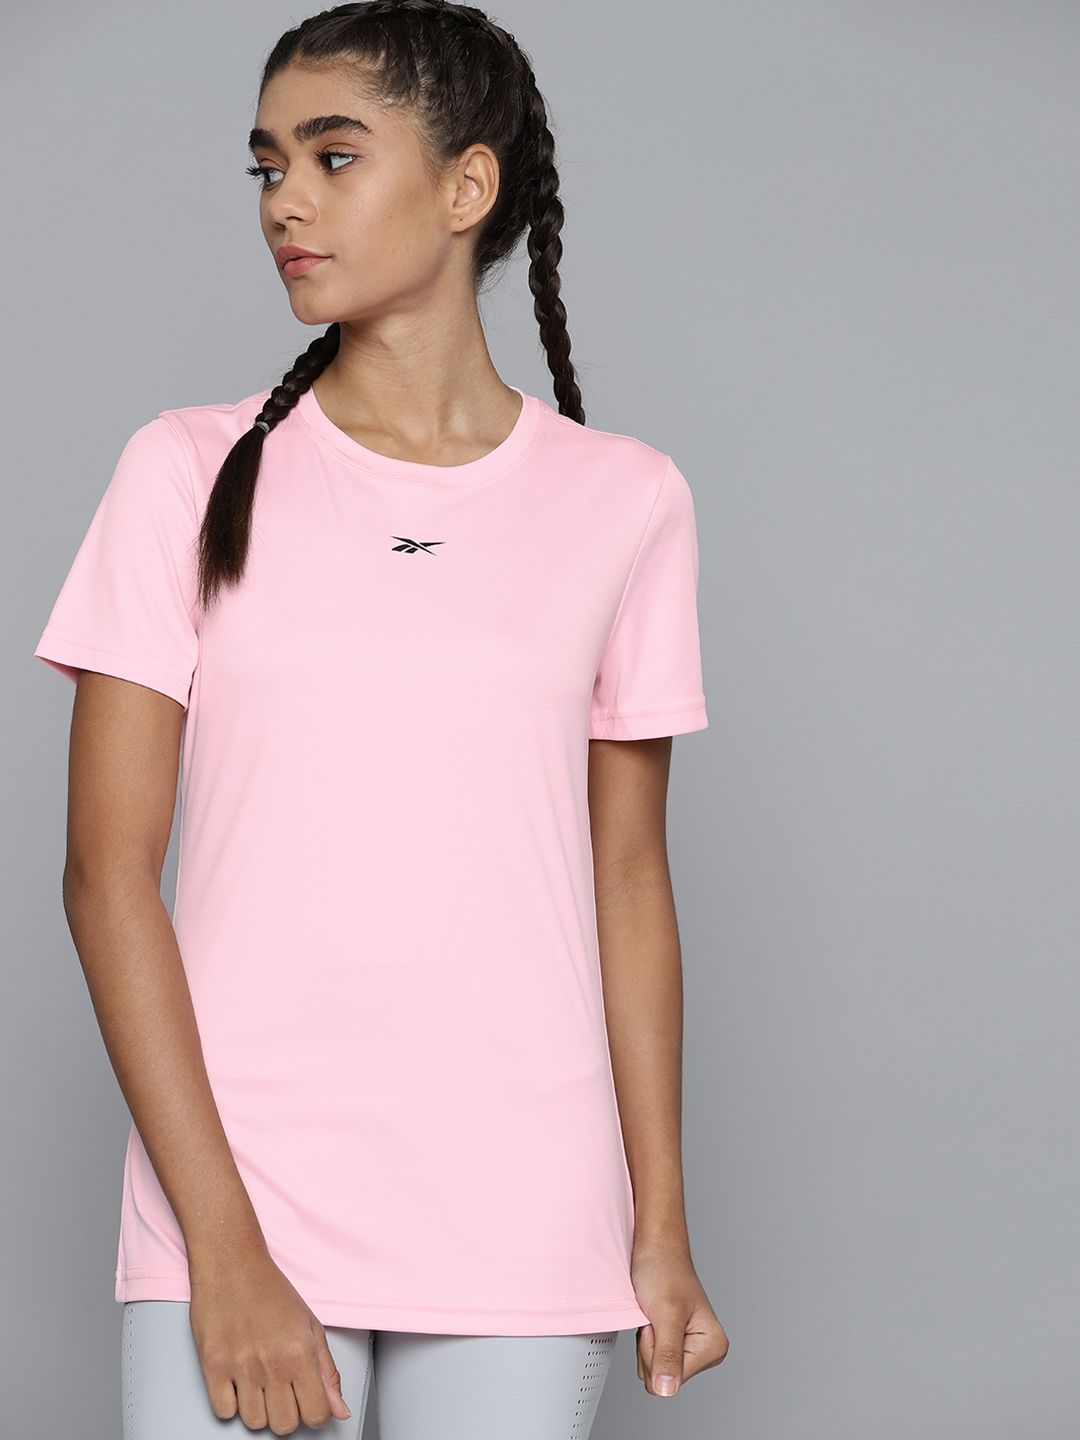 Reebok Women Pink Solid Training or Gym T-shirt Price in India